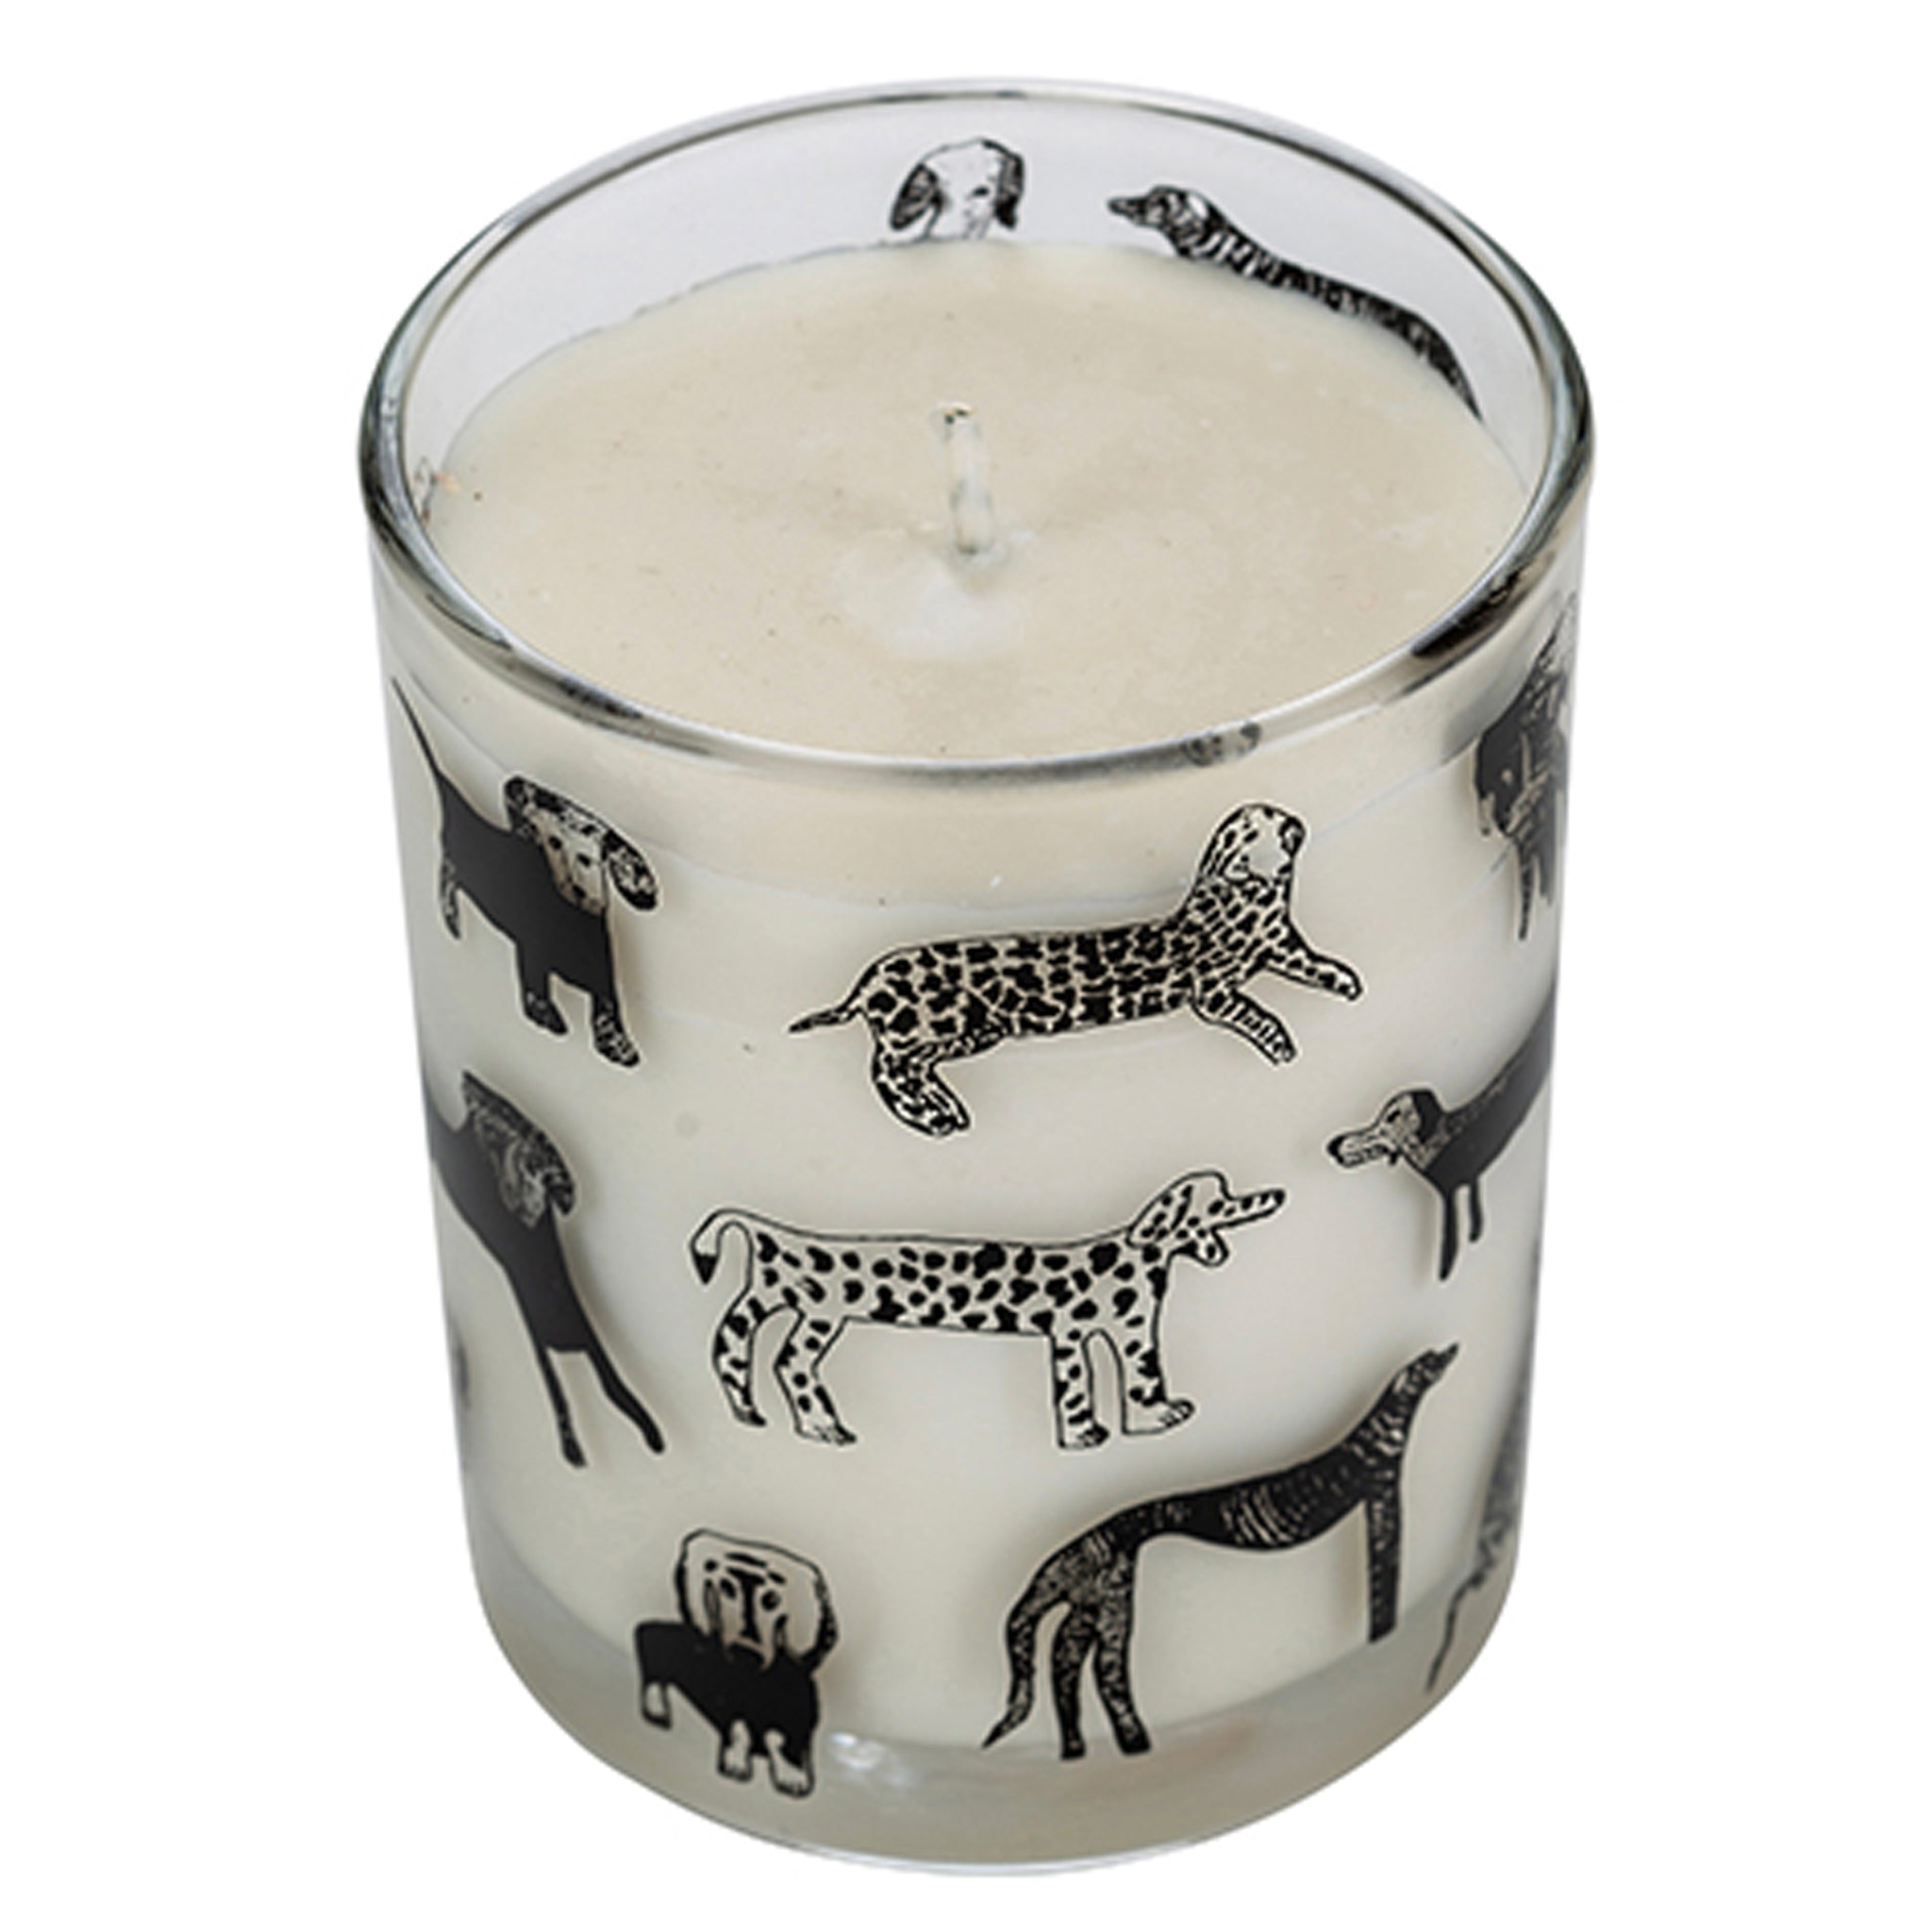 Dogalicious, Rhubarb & Ginger Plant Wax Candle, candle only